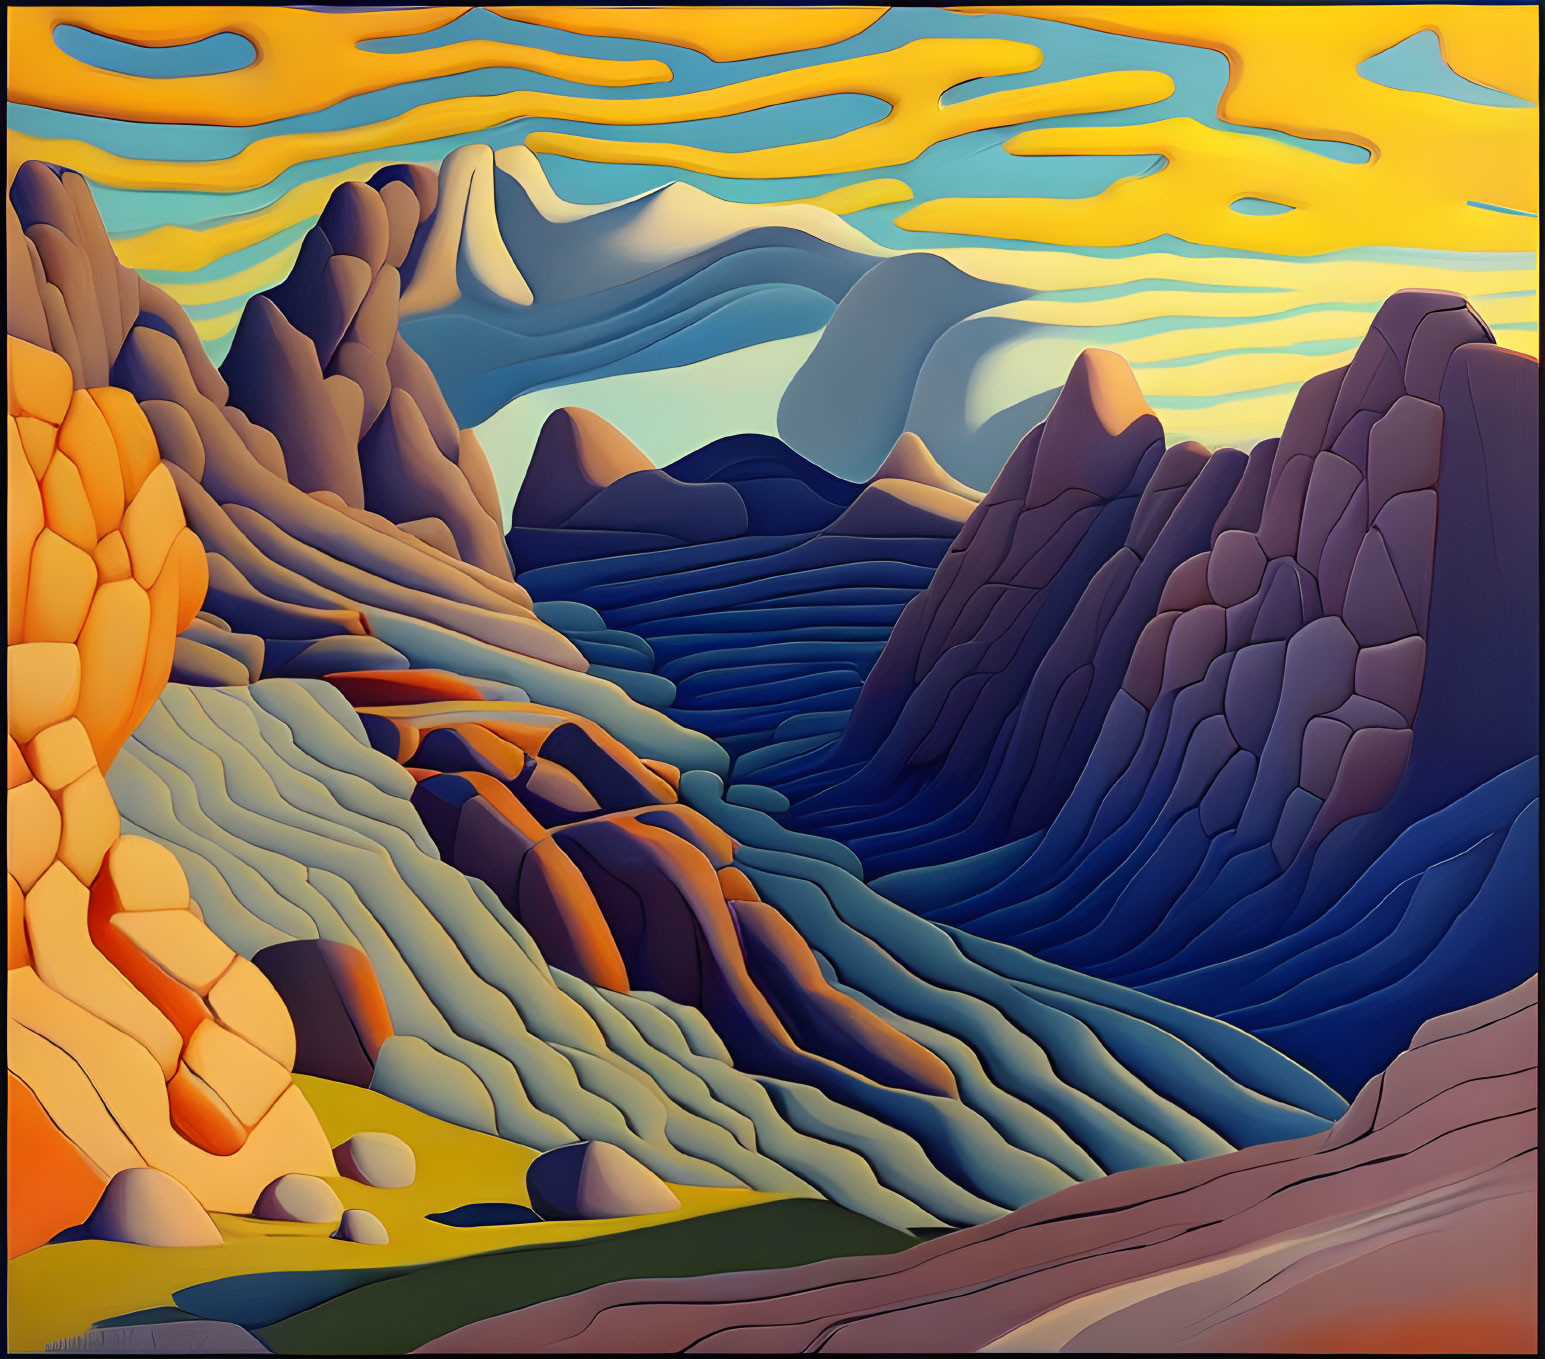 Vibrant landscape with rolling hills and colorful mountains under a yellow sky